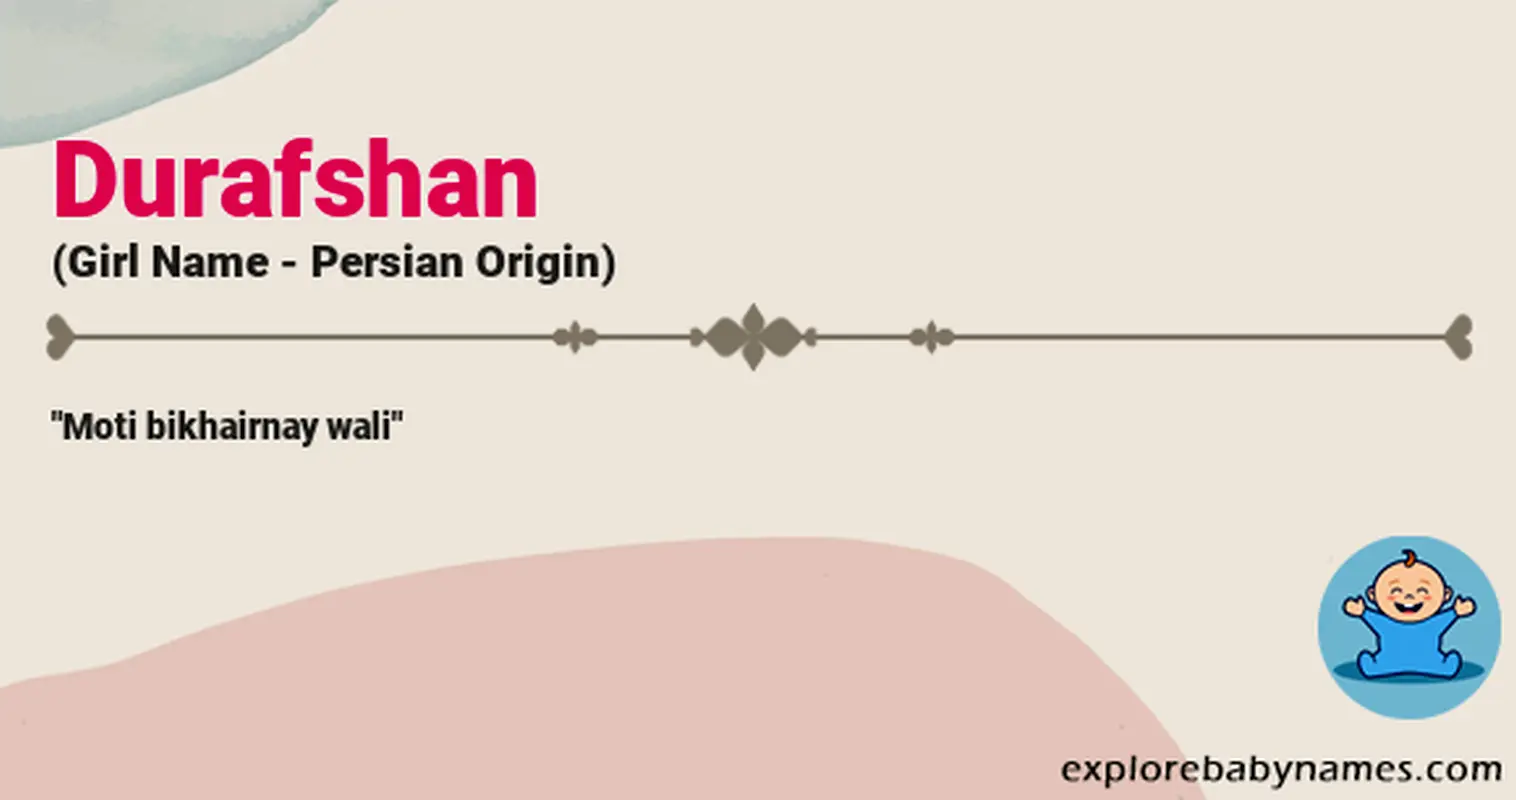 Meaning of Durafshan